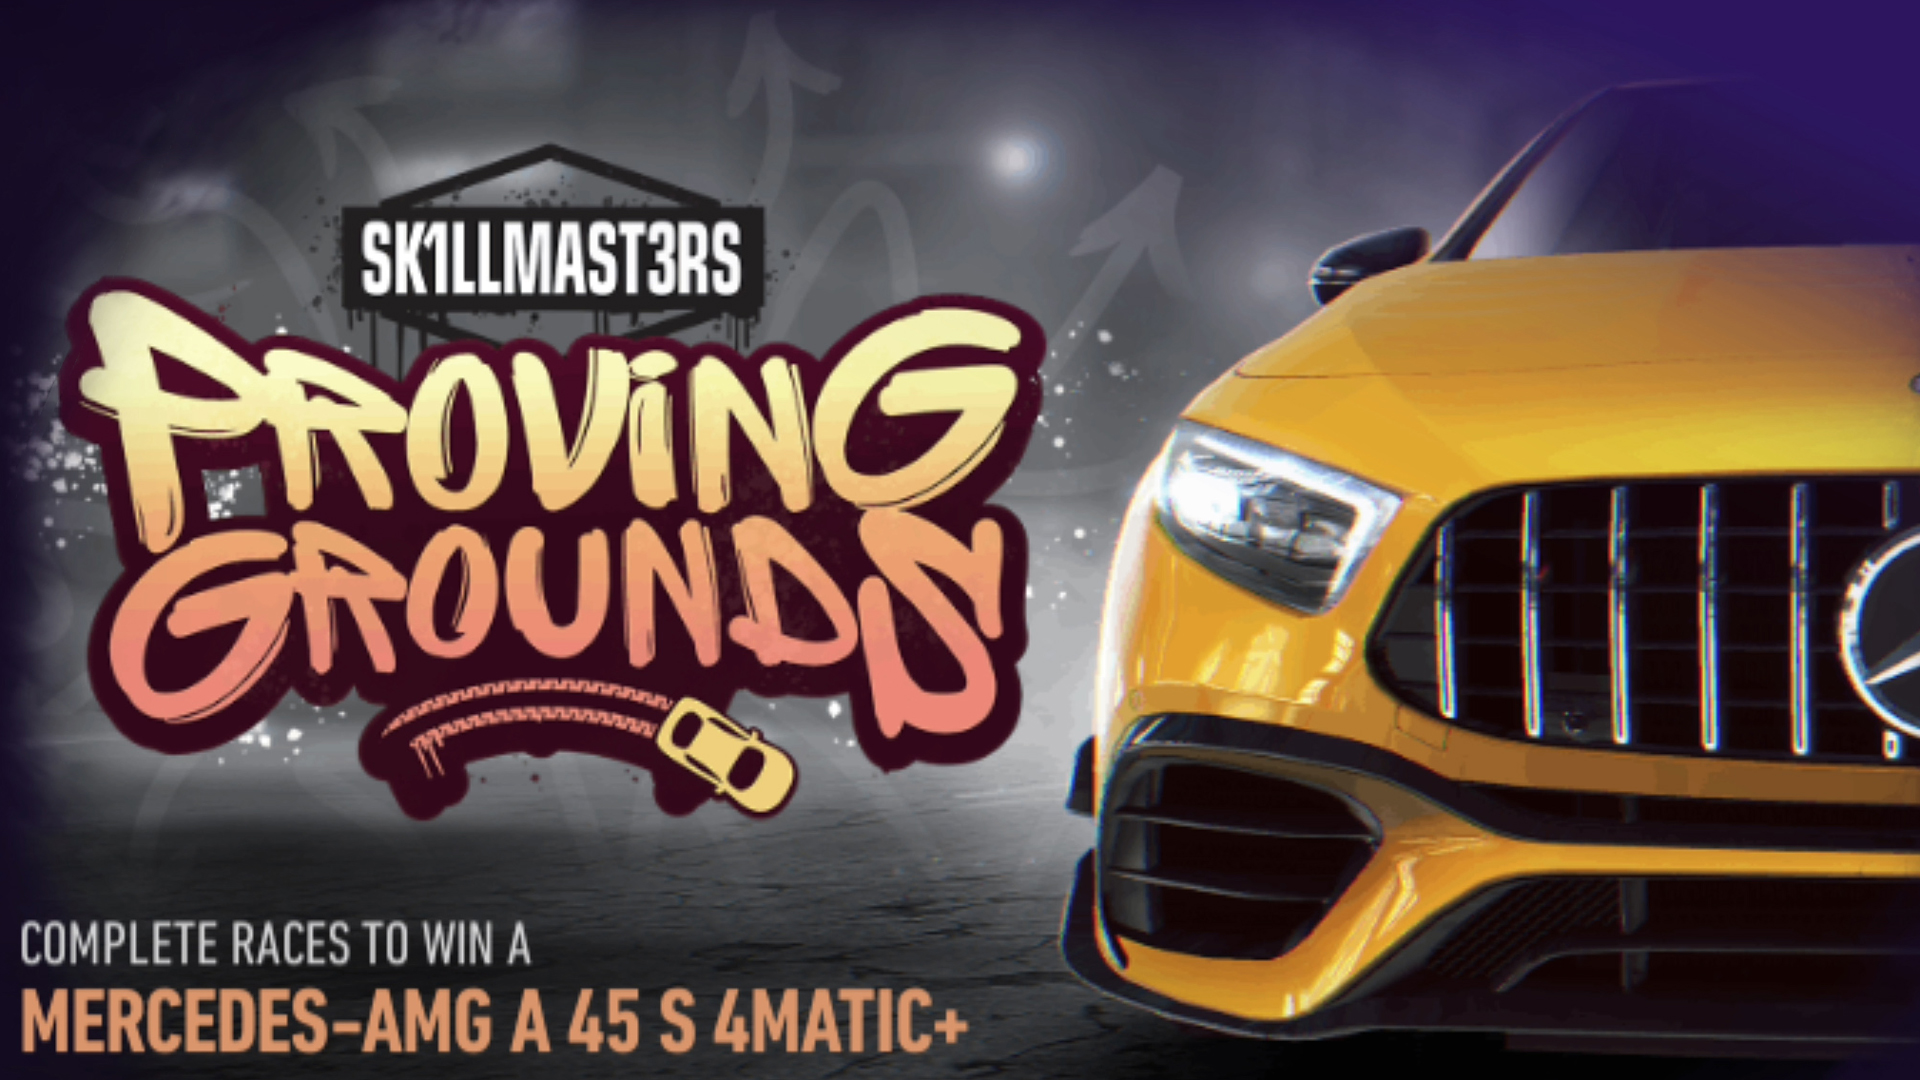 Mercedes-AMG A 45 S 4MATIC+ SK1LLMAST3RS Proving Grounds NFS No Limits FULL EVENT